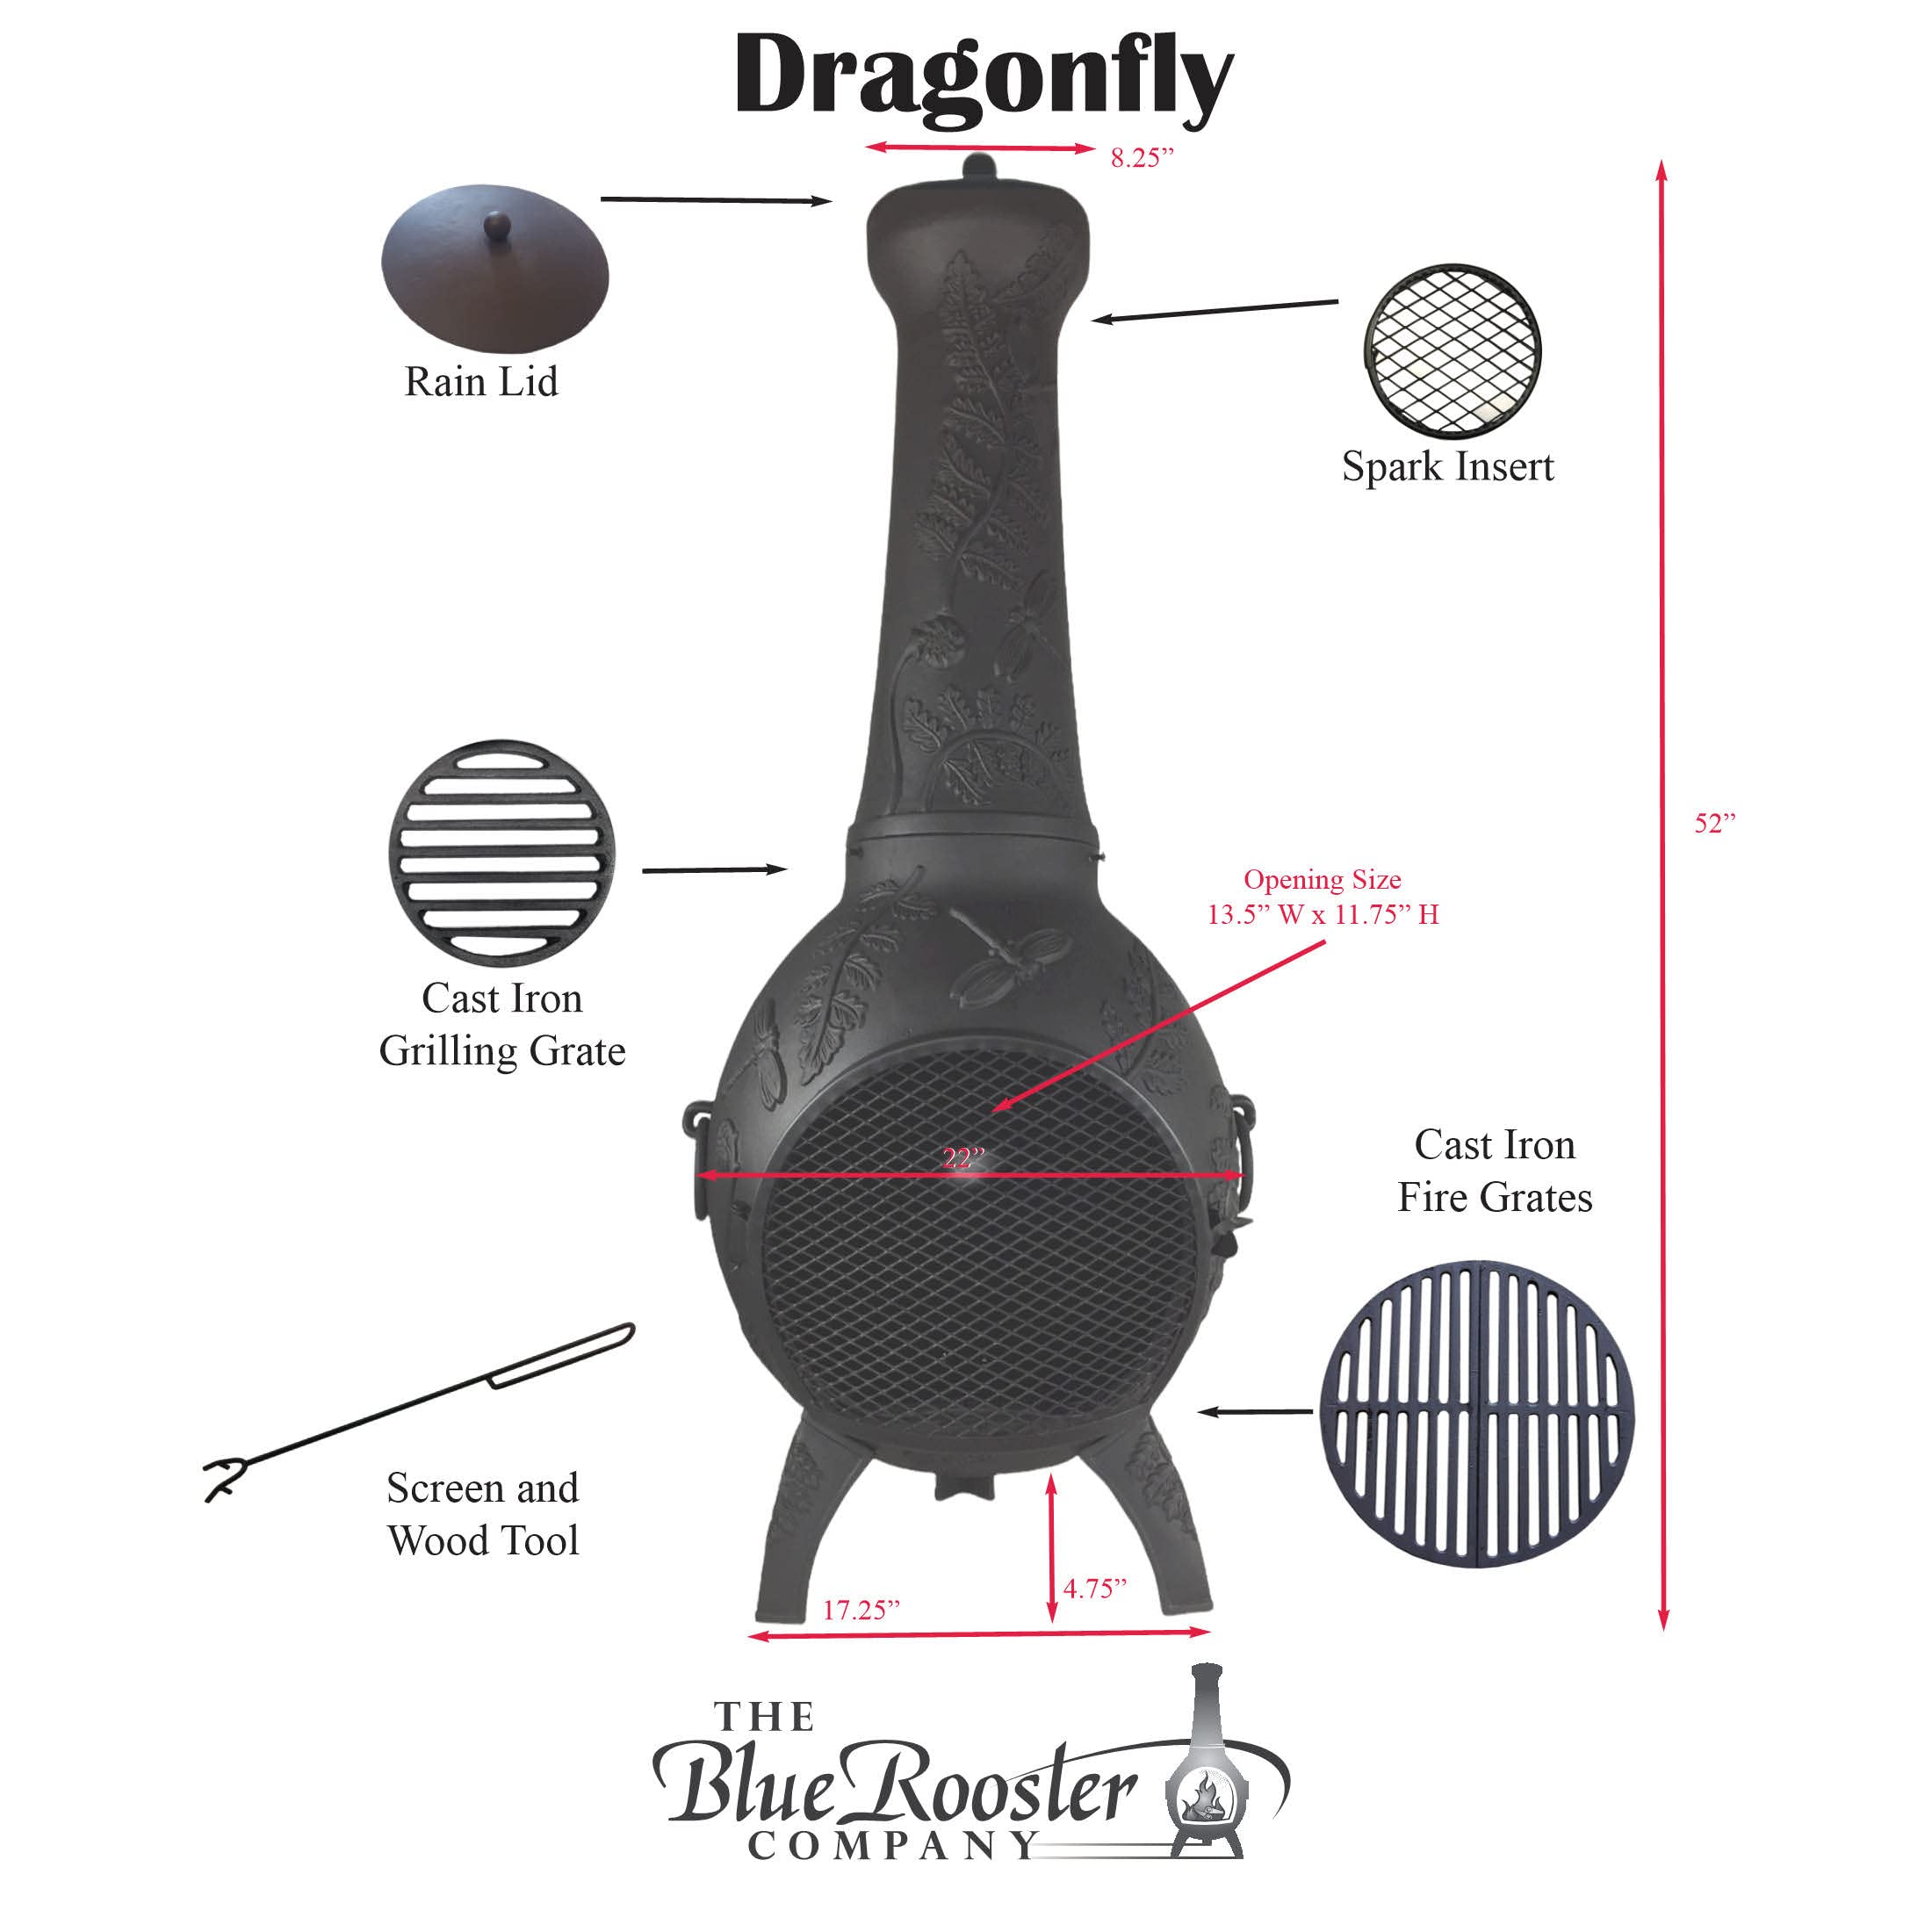 The Blue Rooster Dragonfly Cast Aluminum Chiminea in Charcoal